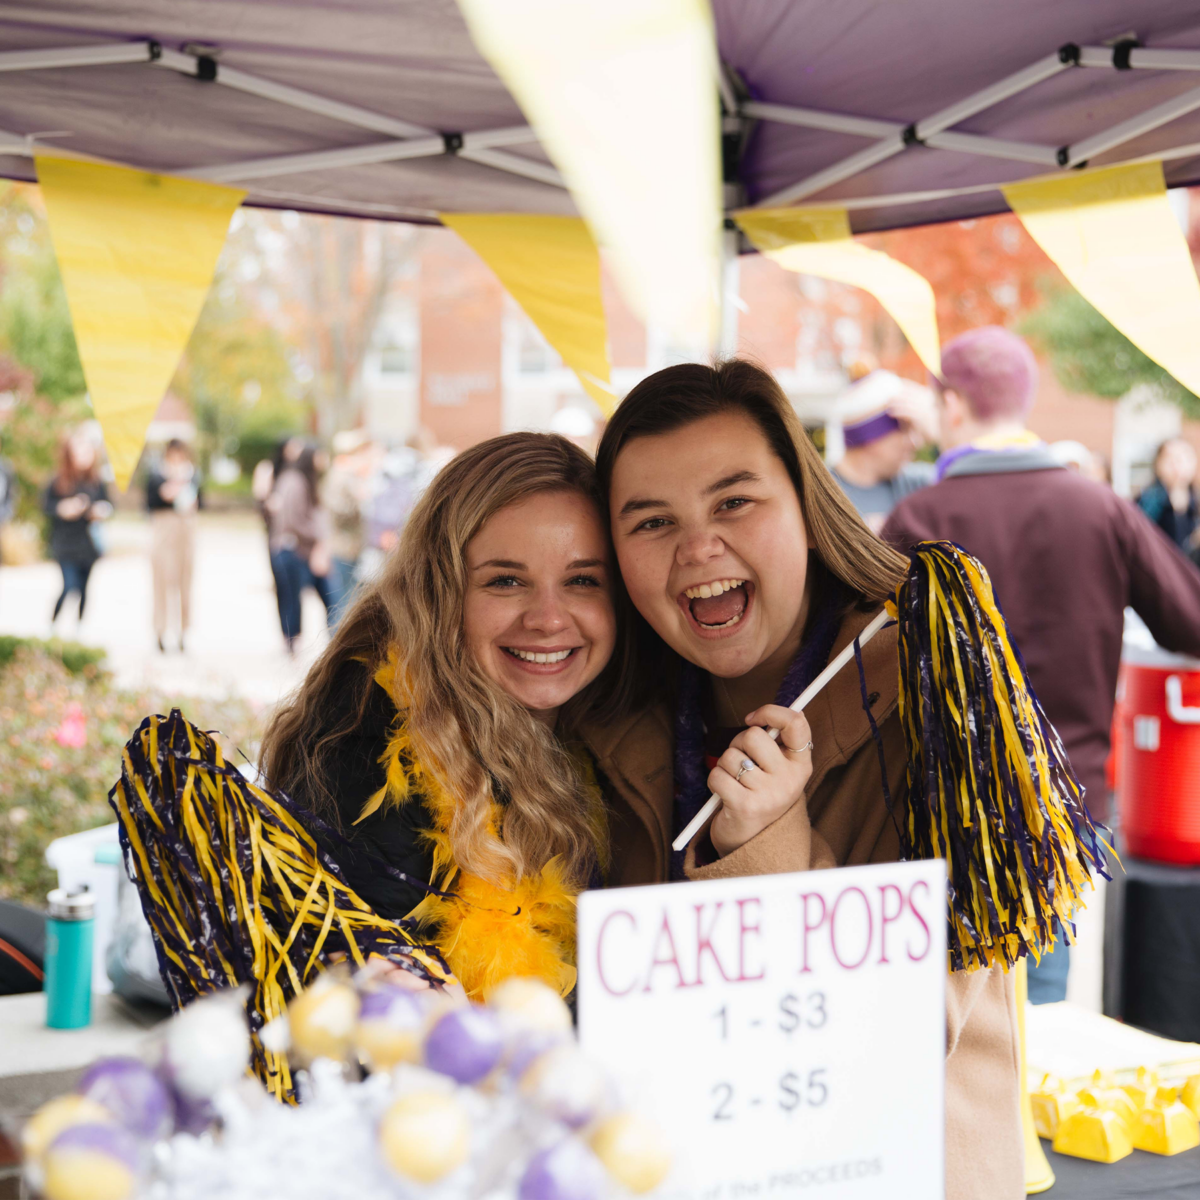 Two smiling girls at a Purple and Gold event